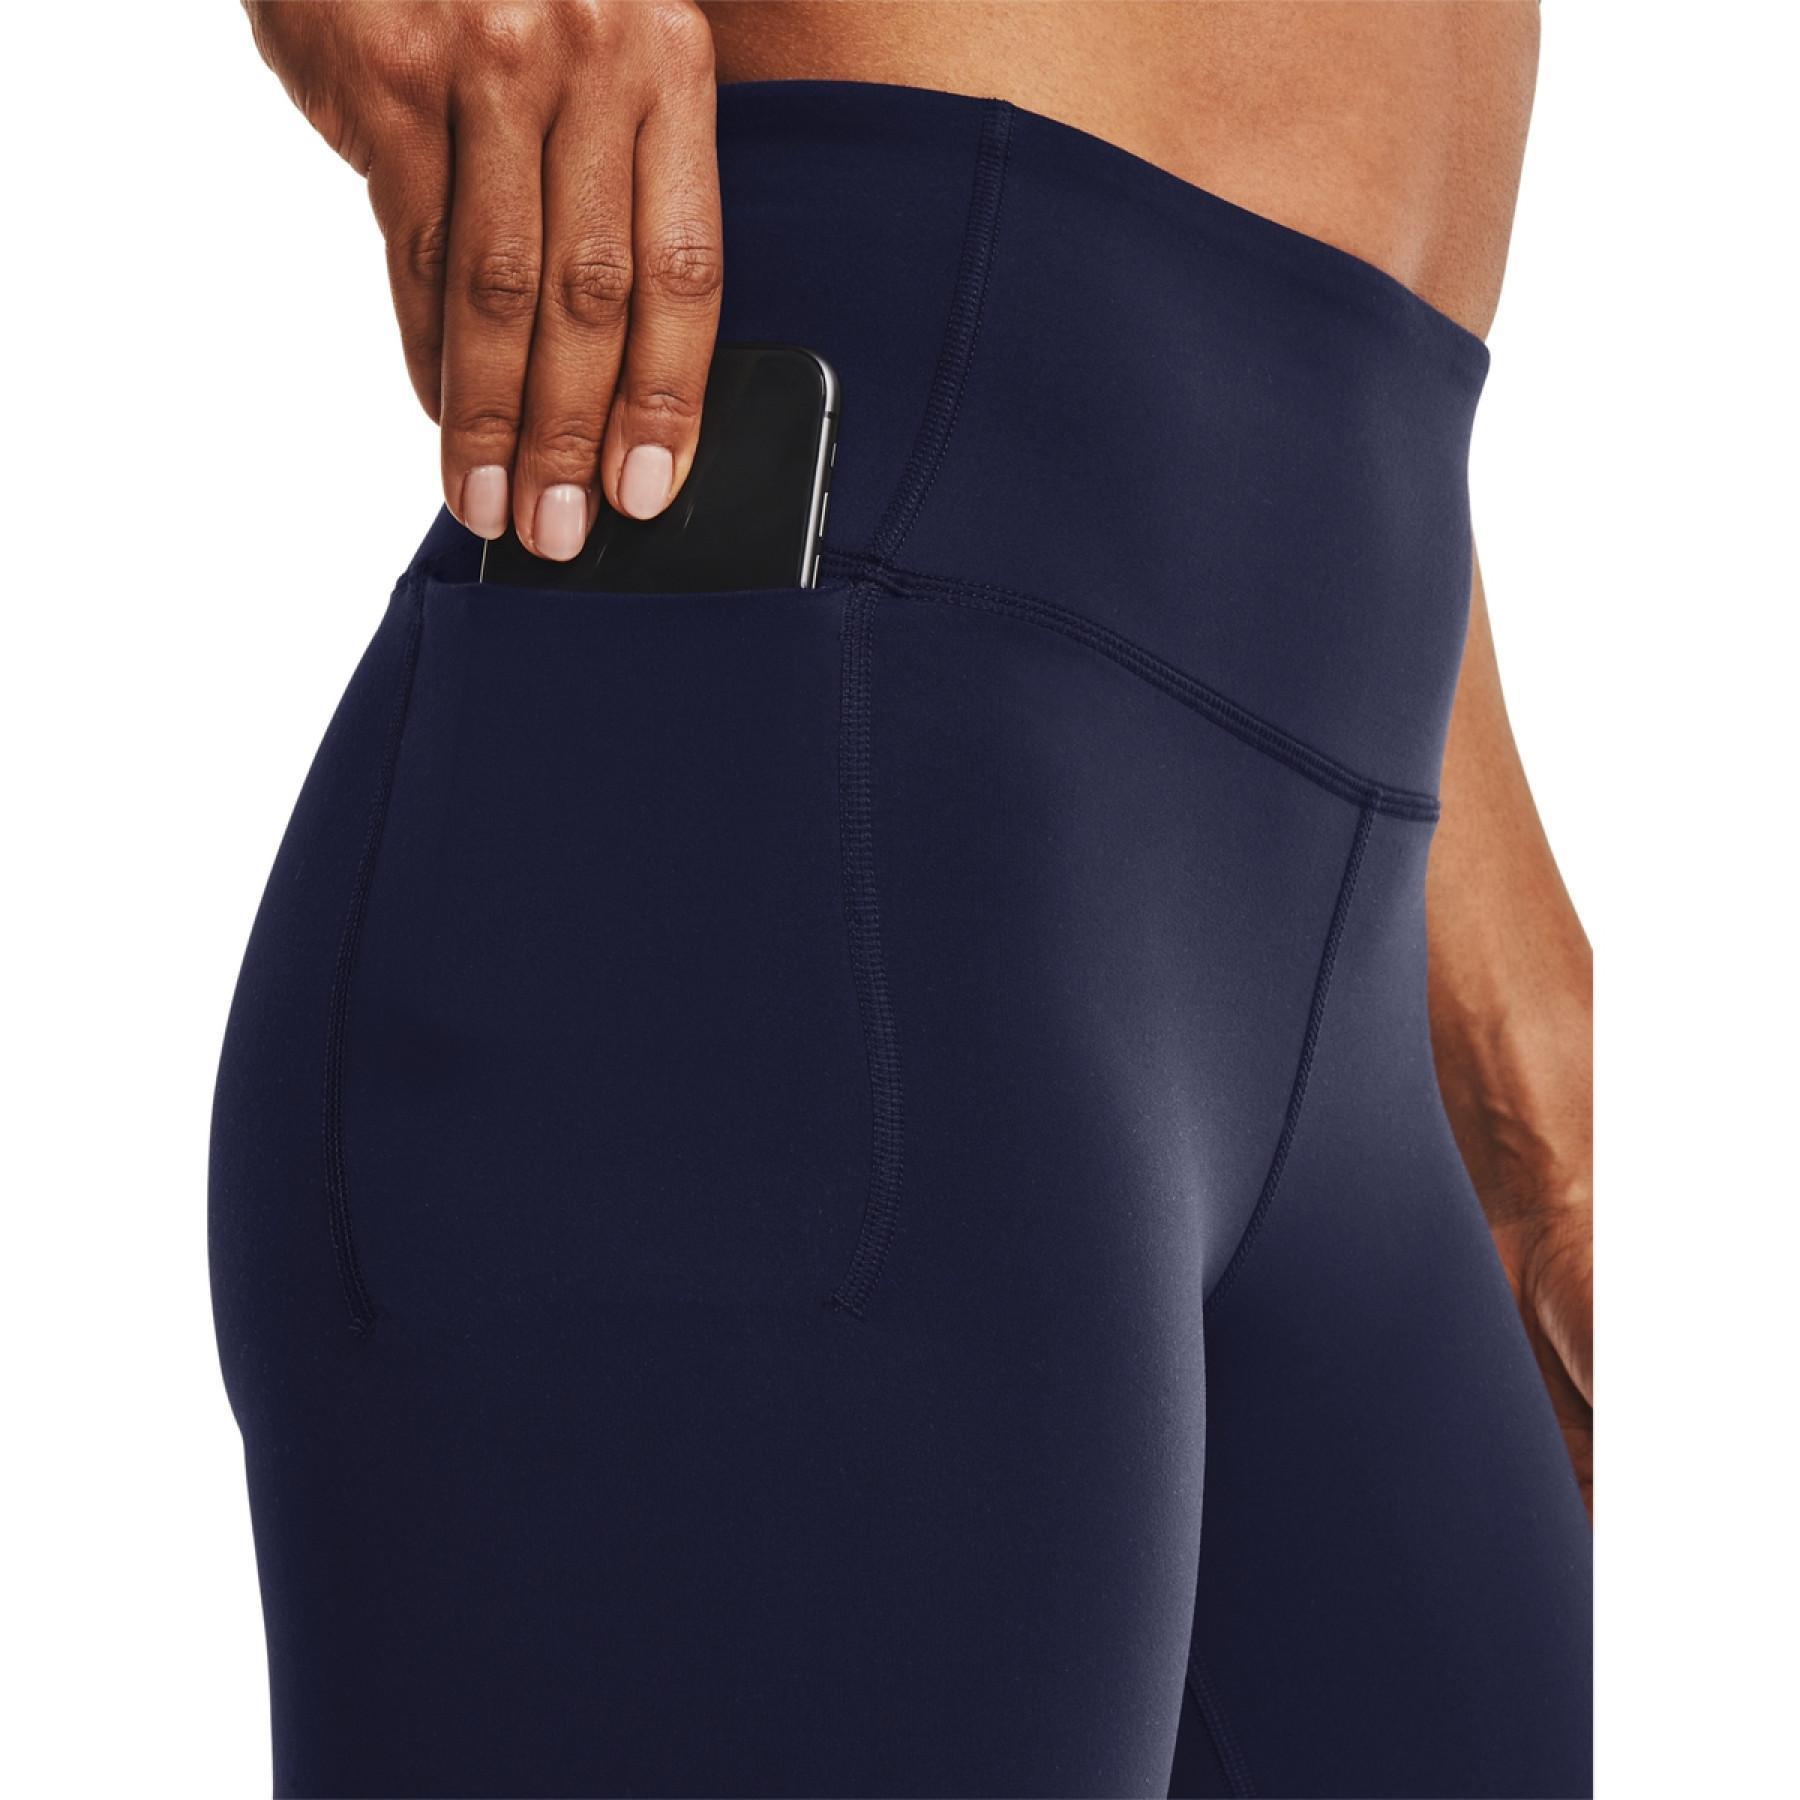 Dames shorts Under Armour cycliste Meridian